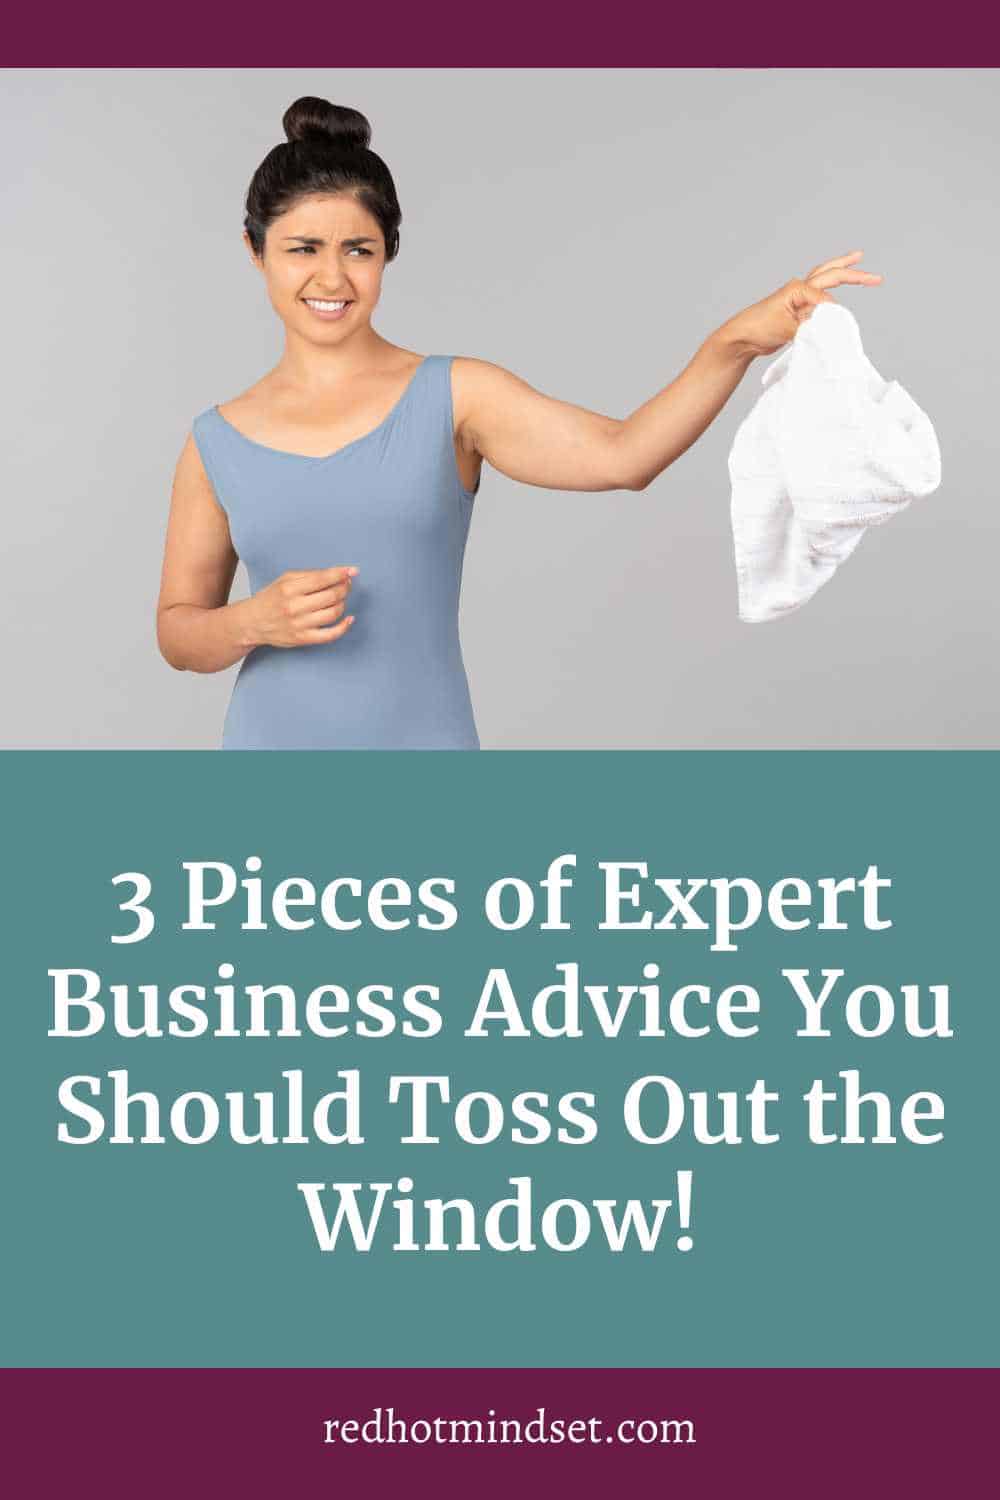 Ep 196 | 3 Pieces of Expert Business Advice You Should Toss Out the Window!